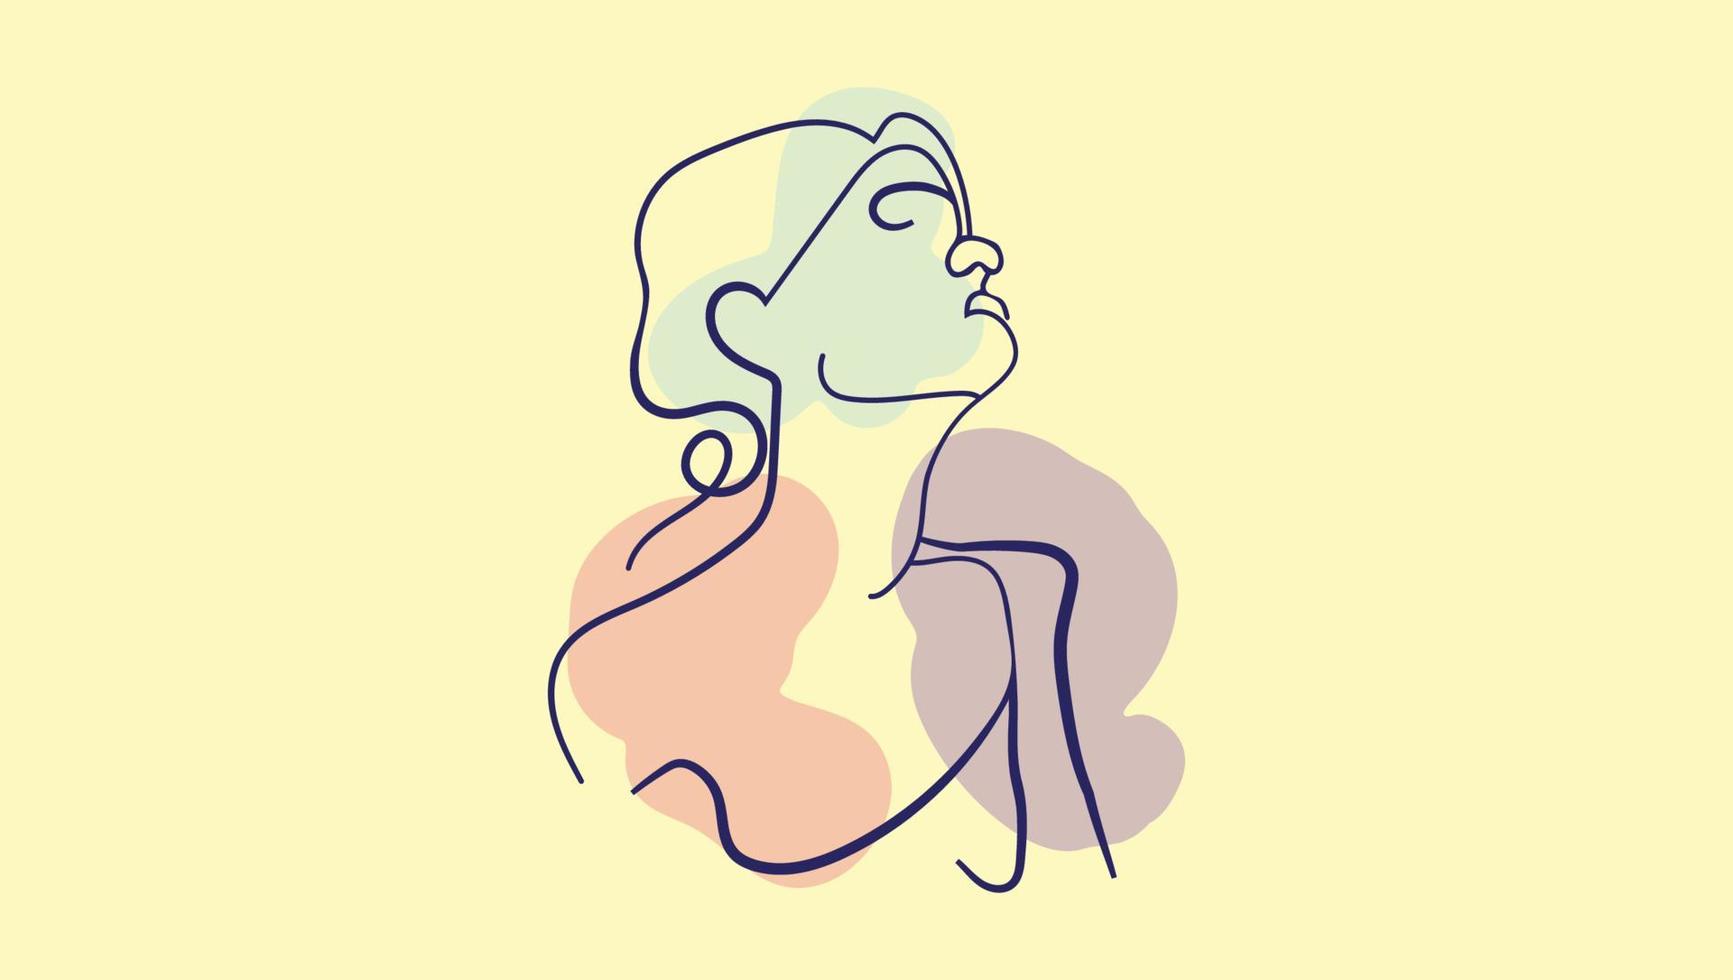 A modern, abstract geometric interpretation of a woman's face, created with a single, continuous line on a minimalistic background Boho Wall Print Digital Print vector